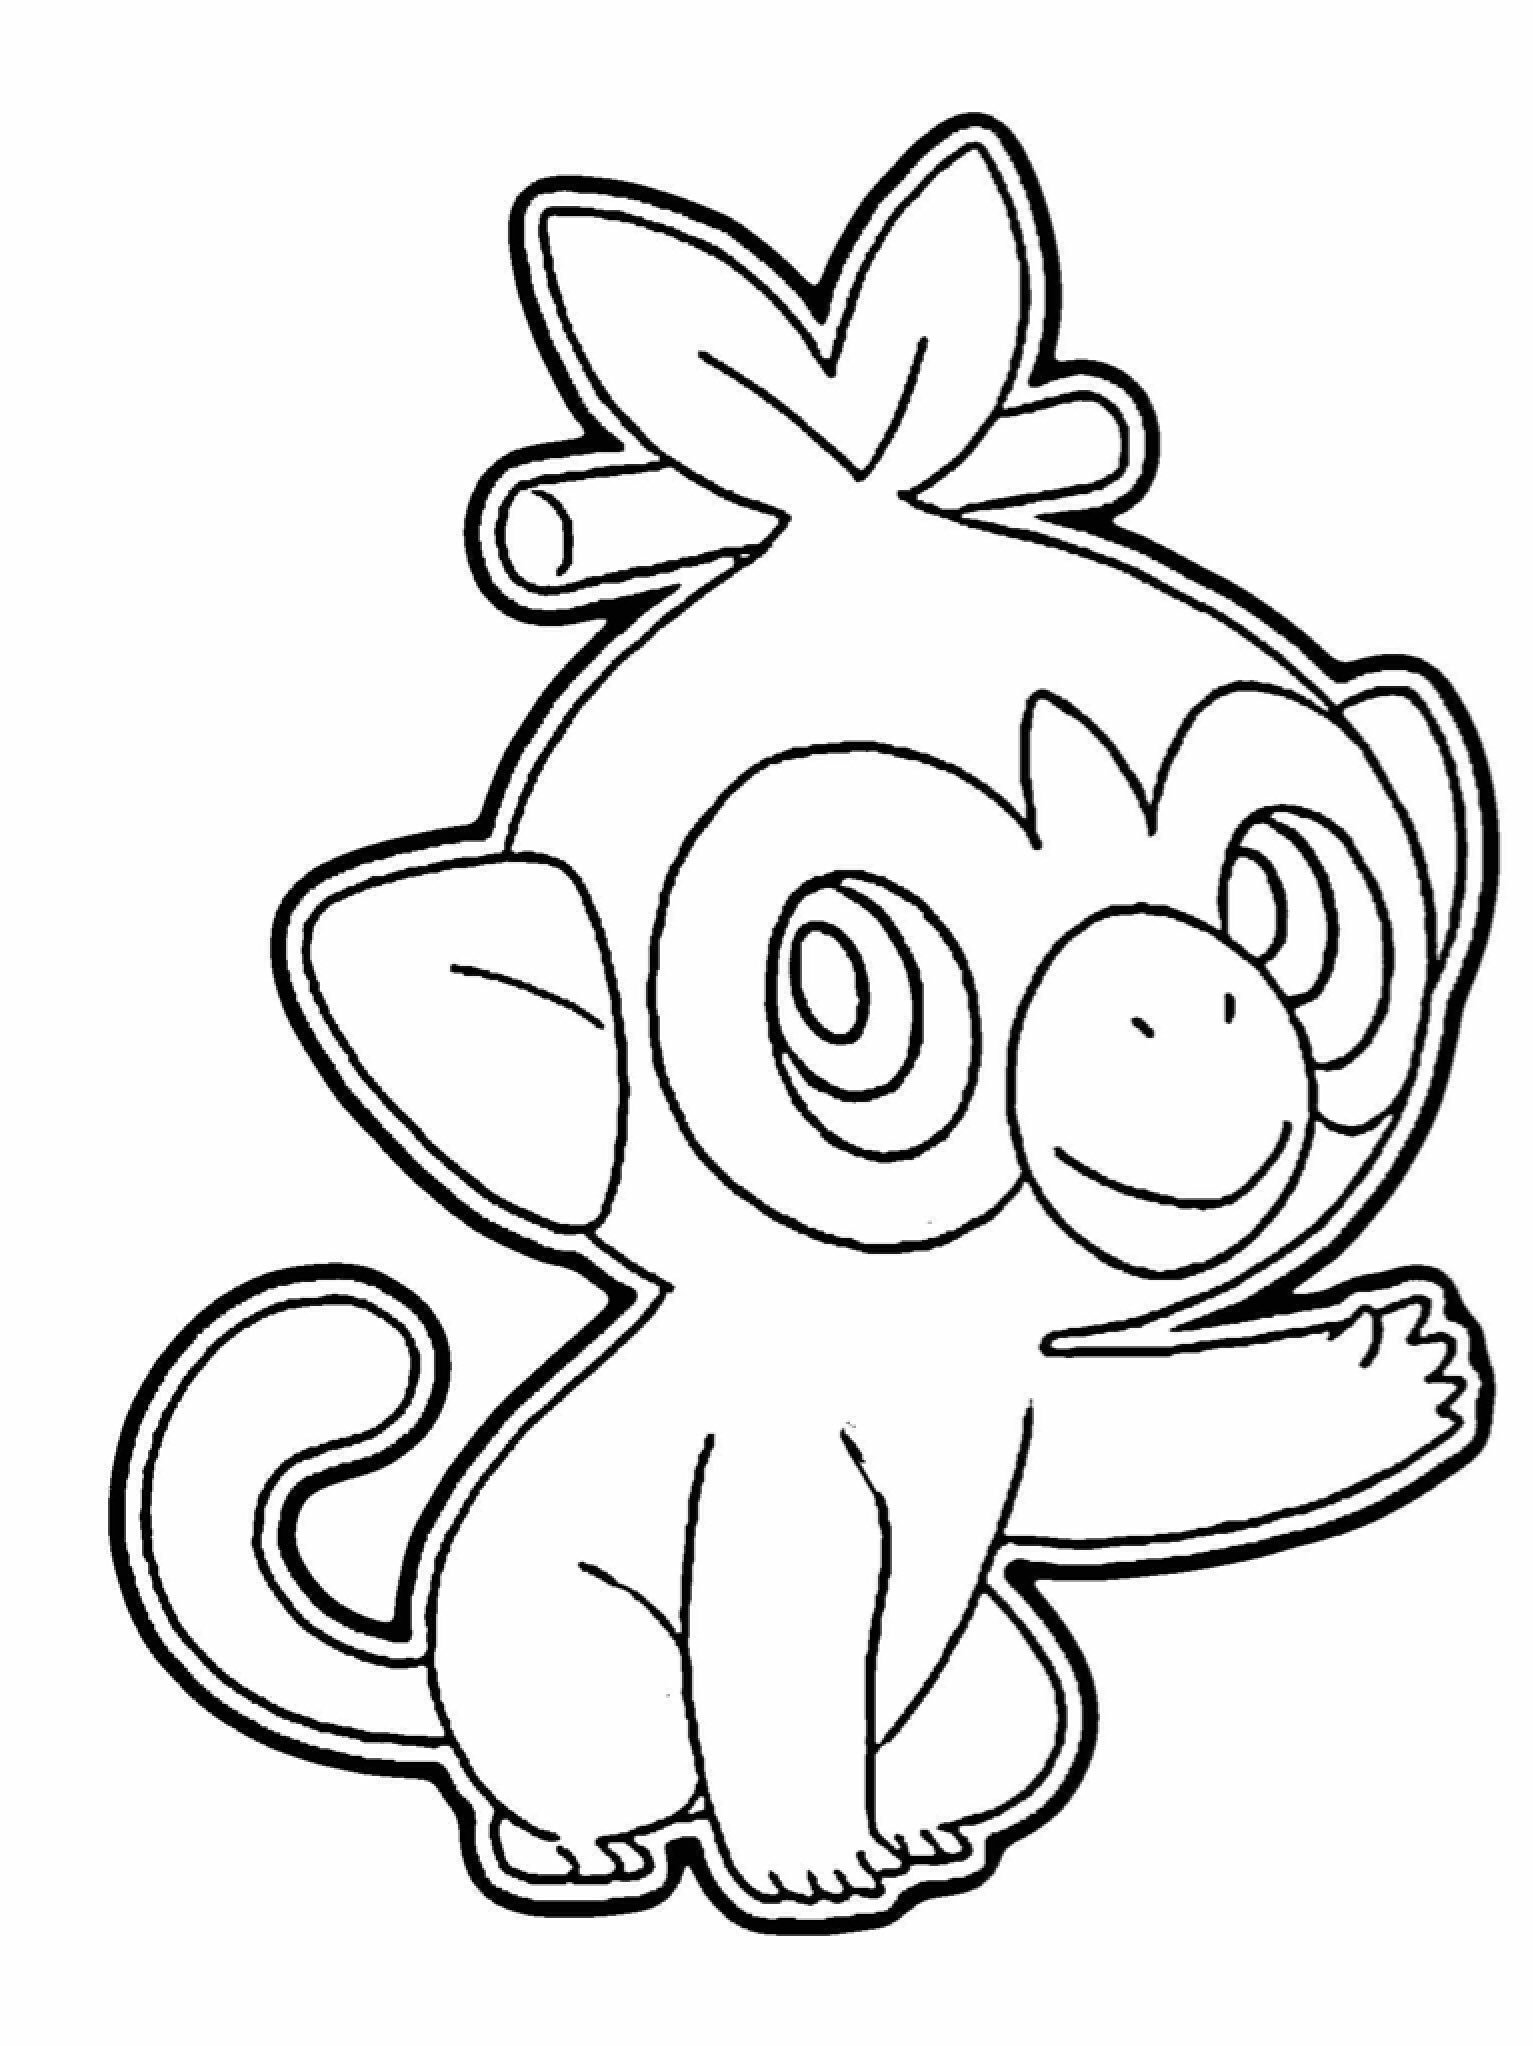 Ashley auf Twitter „More coloring Pages Pokemon Creative https ...